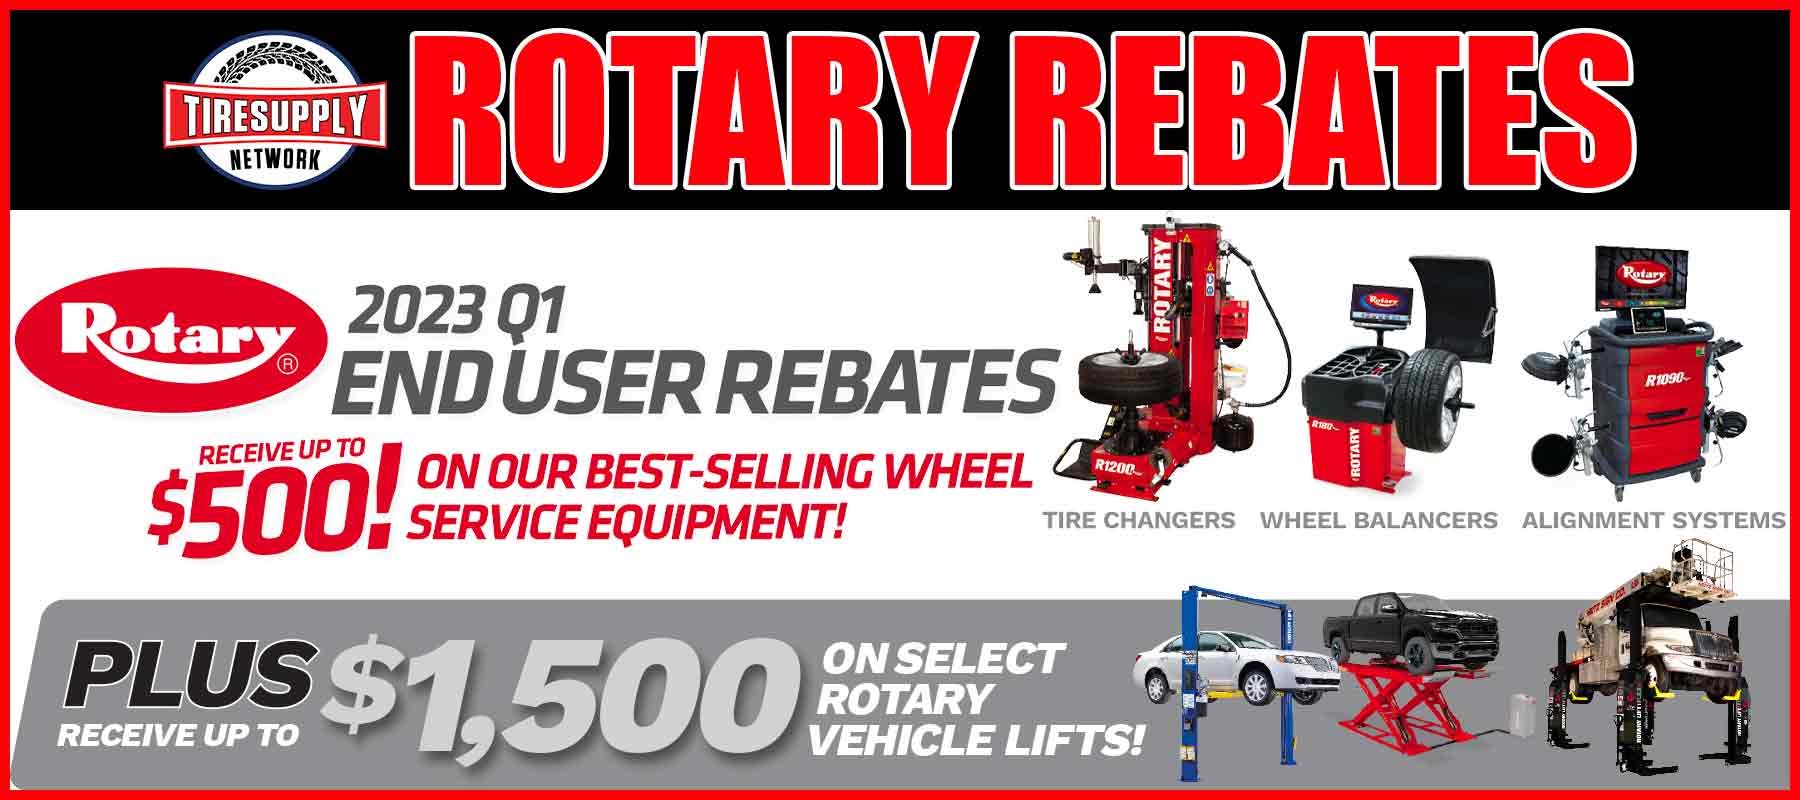 Rotary End-User Rebates Now Available on Select Tire Changers, Wheel Balancers, Alignment Systems, and Vehicle Lifts!